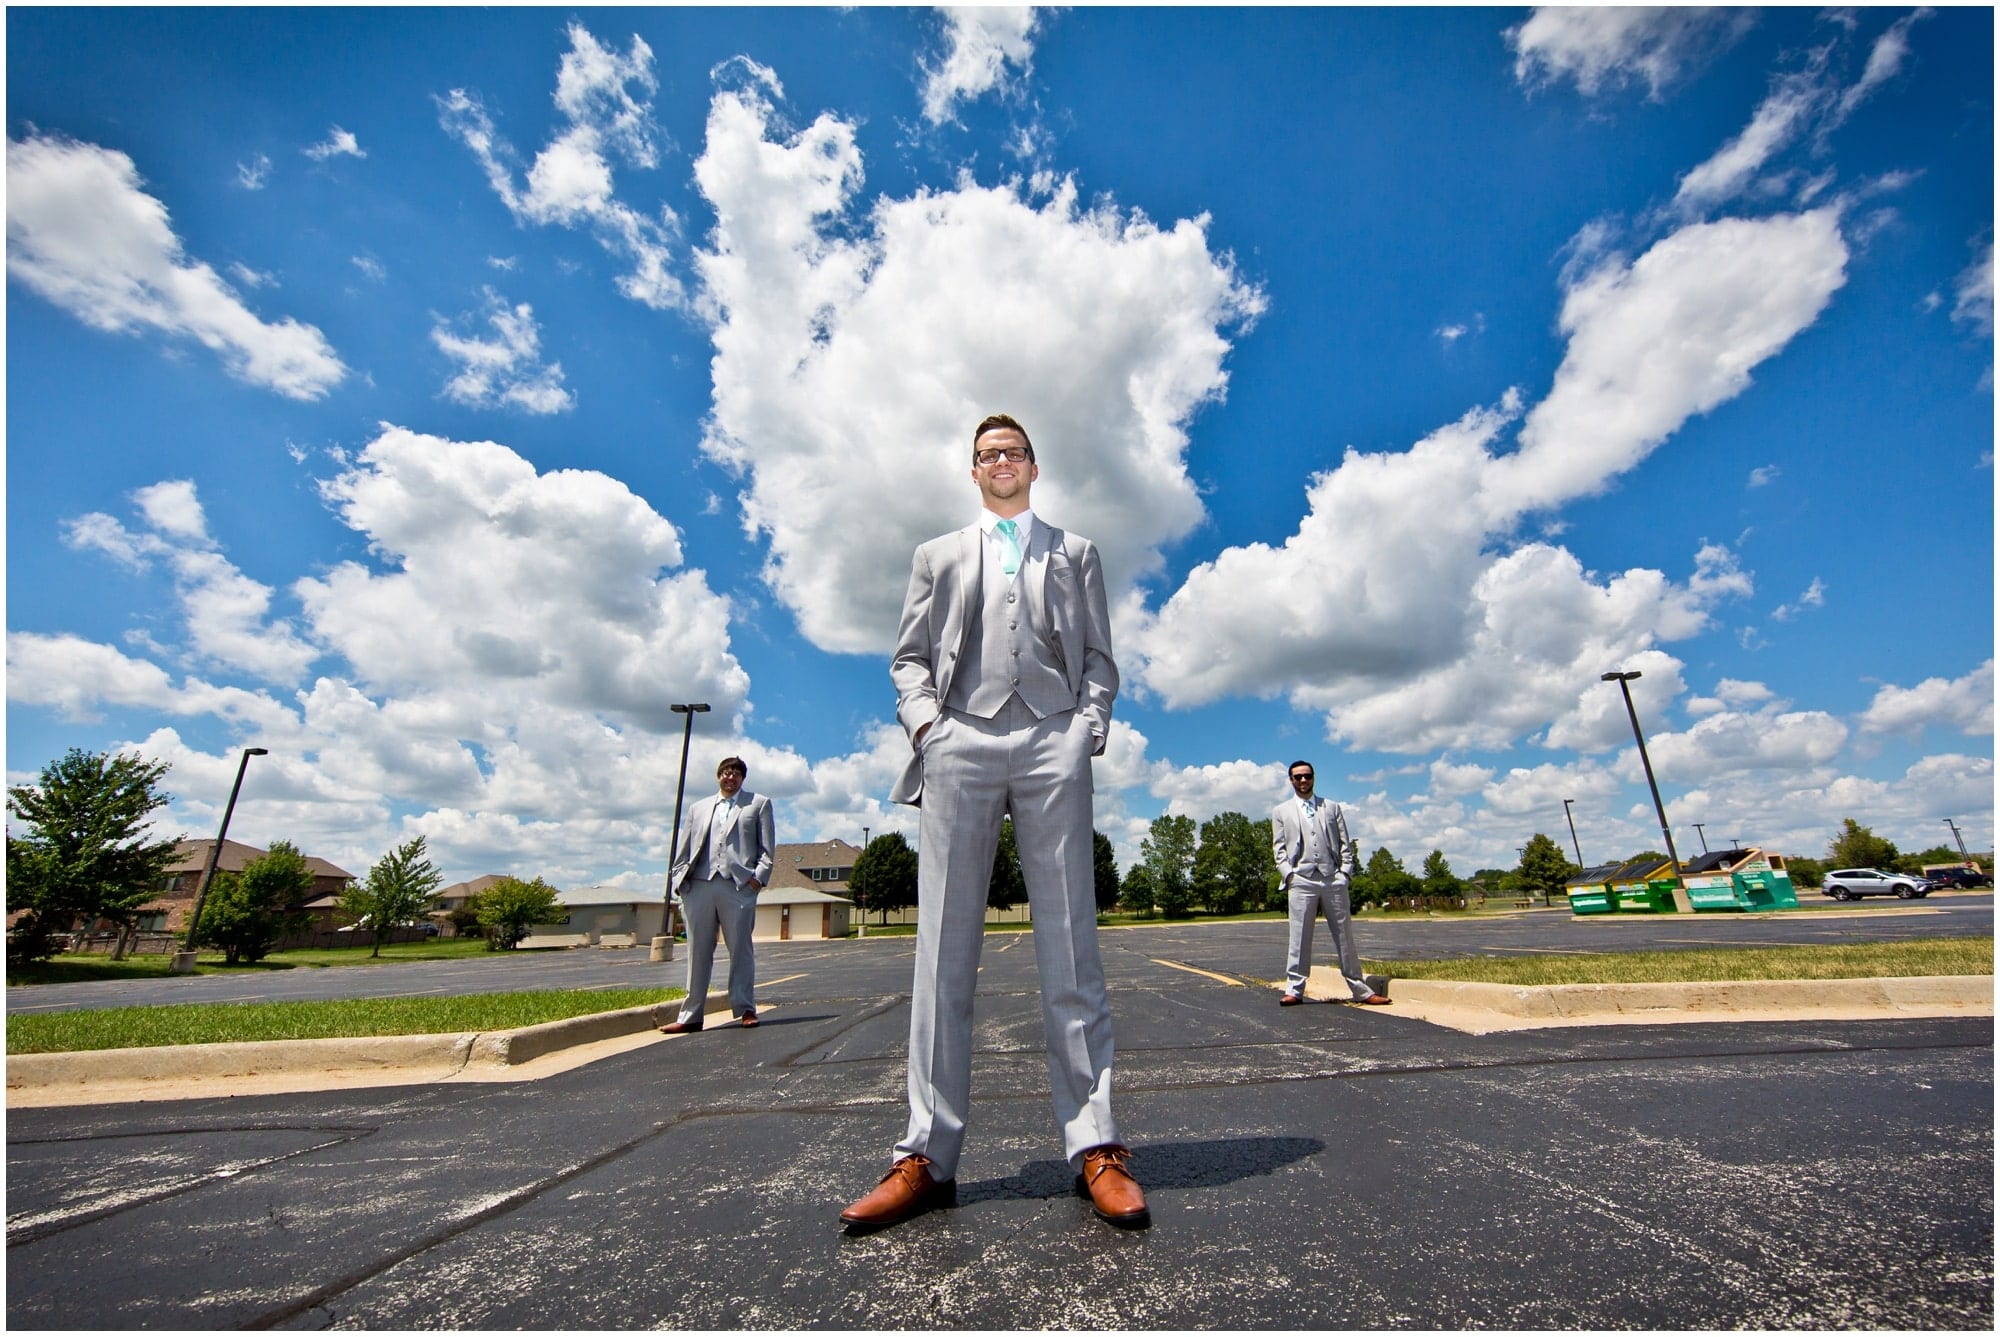 County Line Orchard Wedding Photographer artistic wide angel portrait of groom with 2 groomsmen and big white clouds and bright blue sky